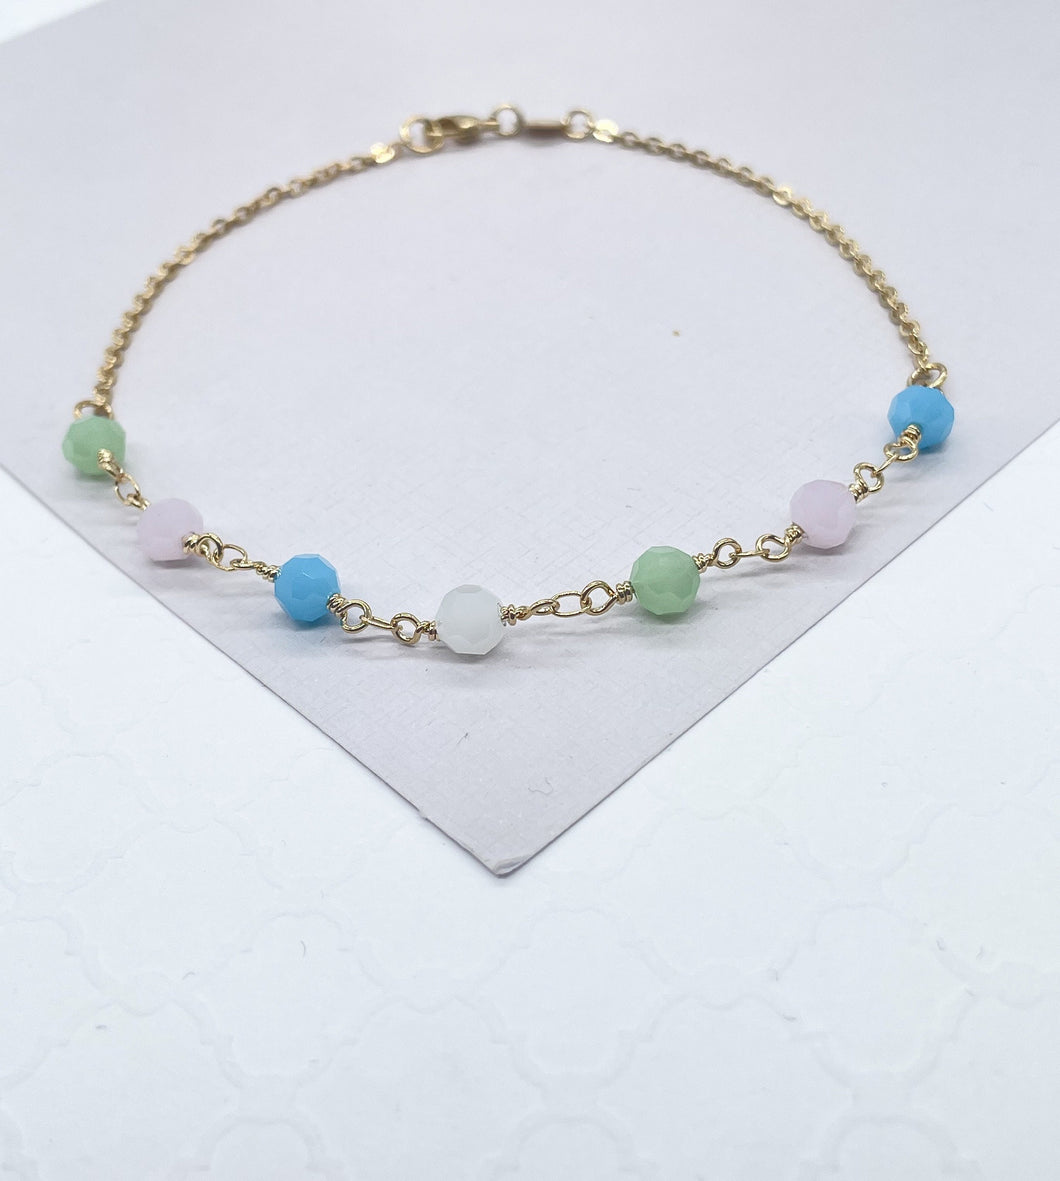 18k Gold Filled Curb Link Anklet With Multi-Colored Beads